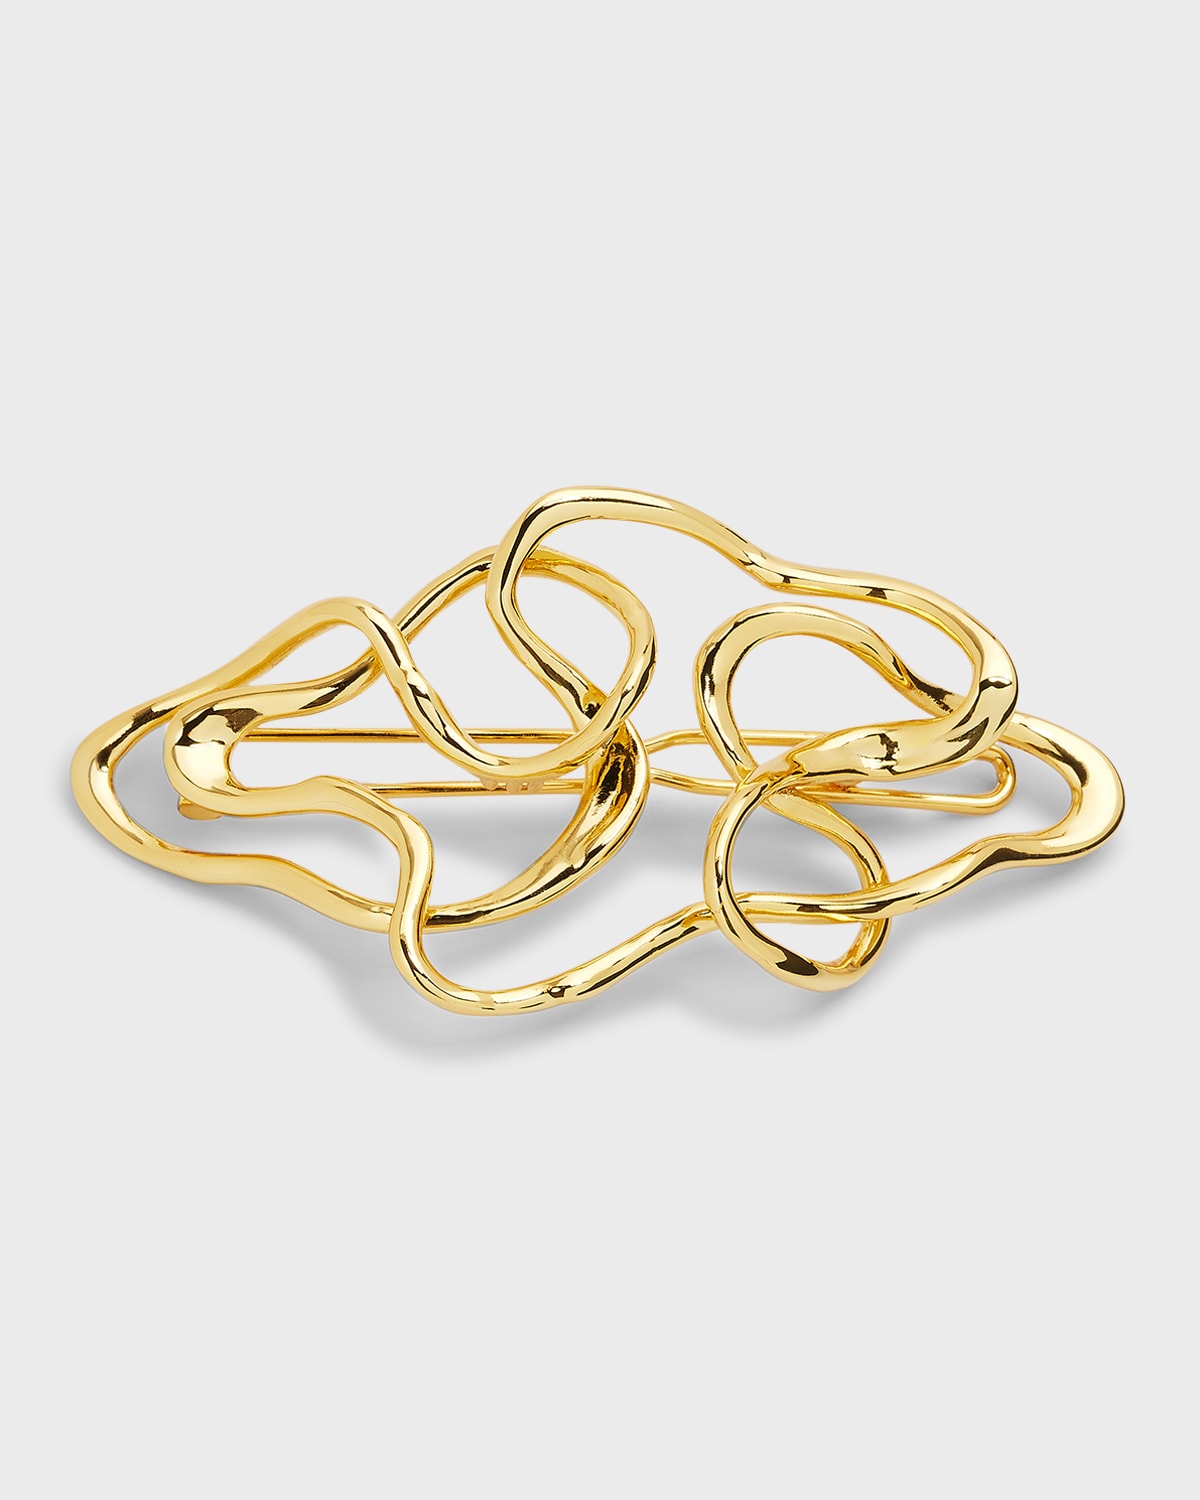 Twisted Gold Barrette